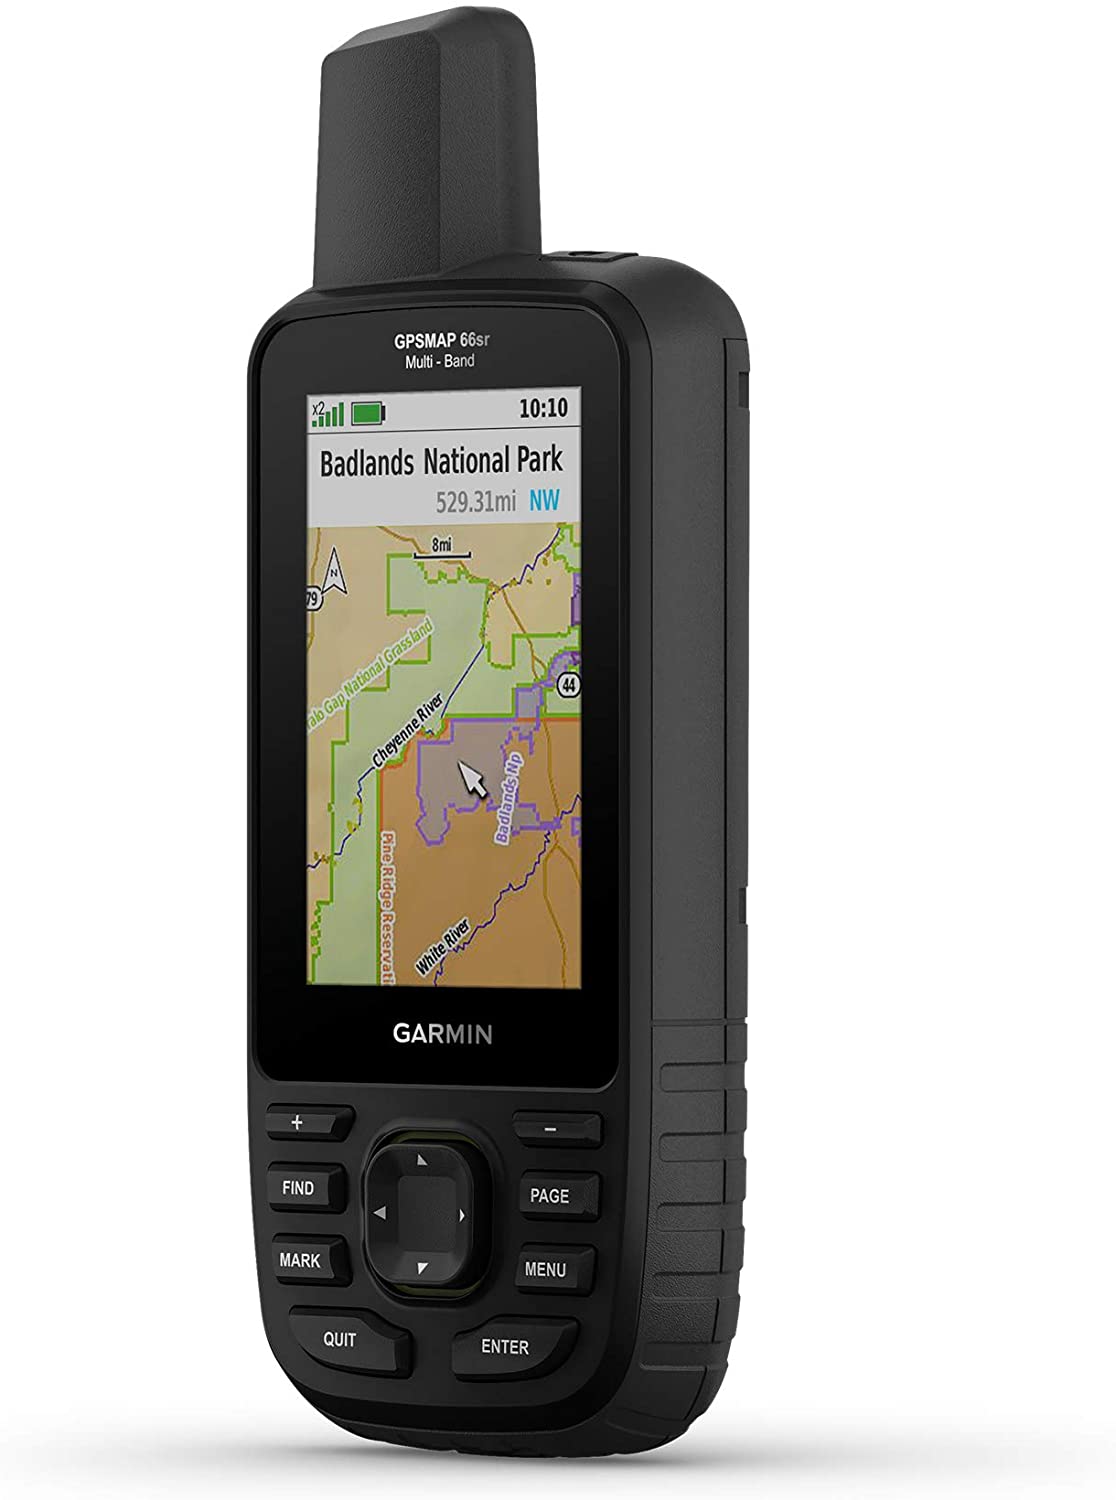 Garmin - GPSMAP 66sr, Hiking Handheld with Expanded GNSS and Multi-Band TechnologyHandheld, 3" Color Display